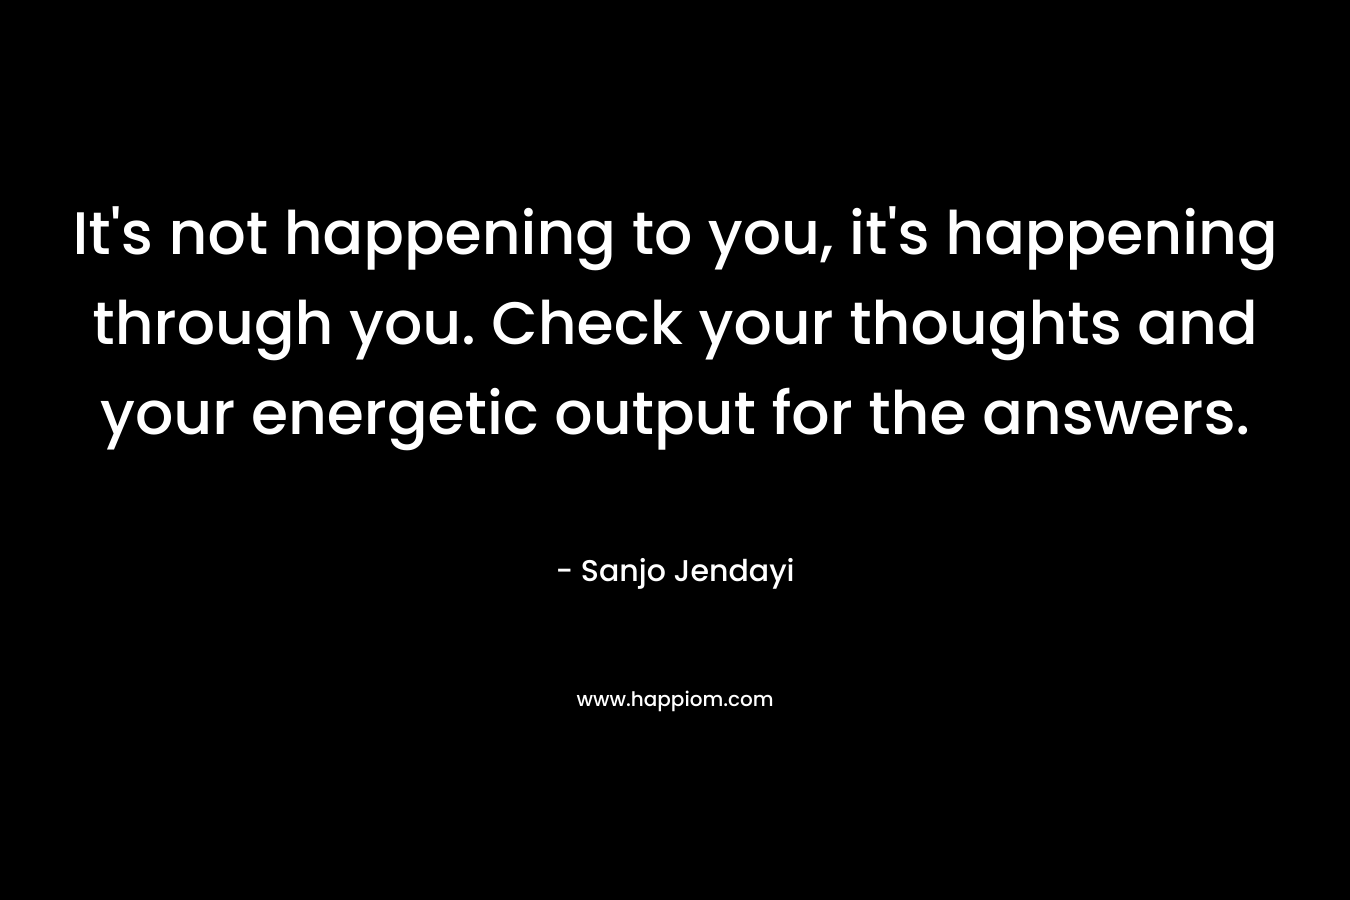 It's not happening to you, it's happening through you. Check your thoughts and your energetic output for the answers.